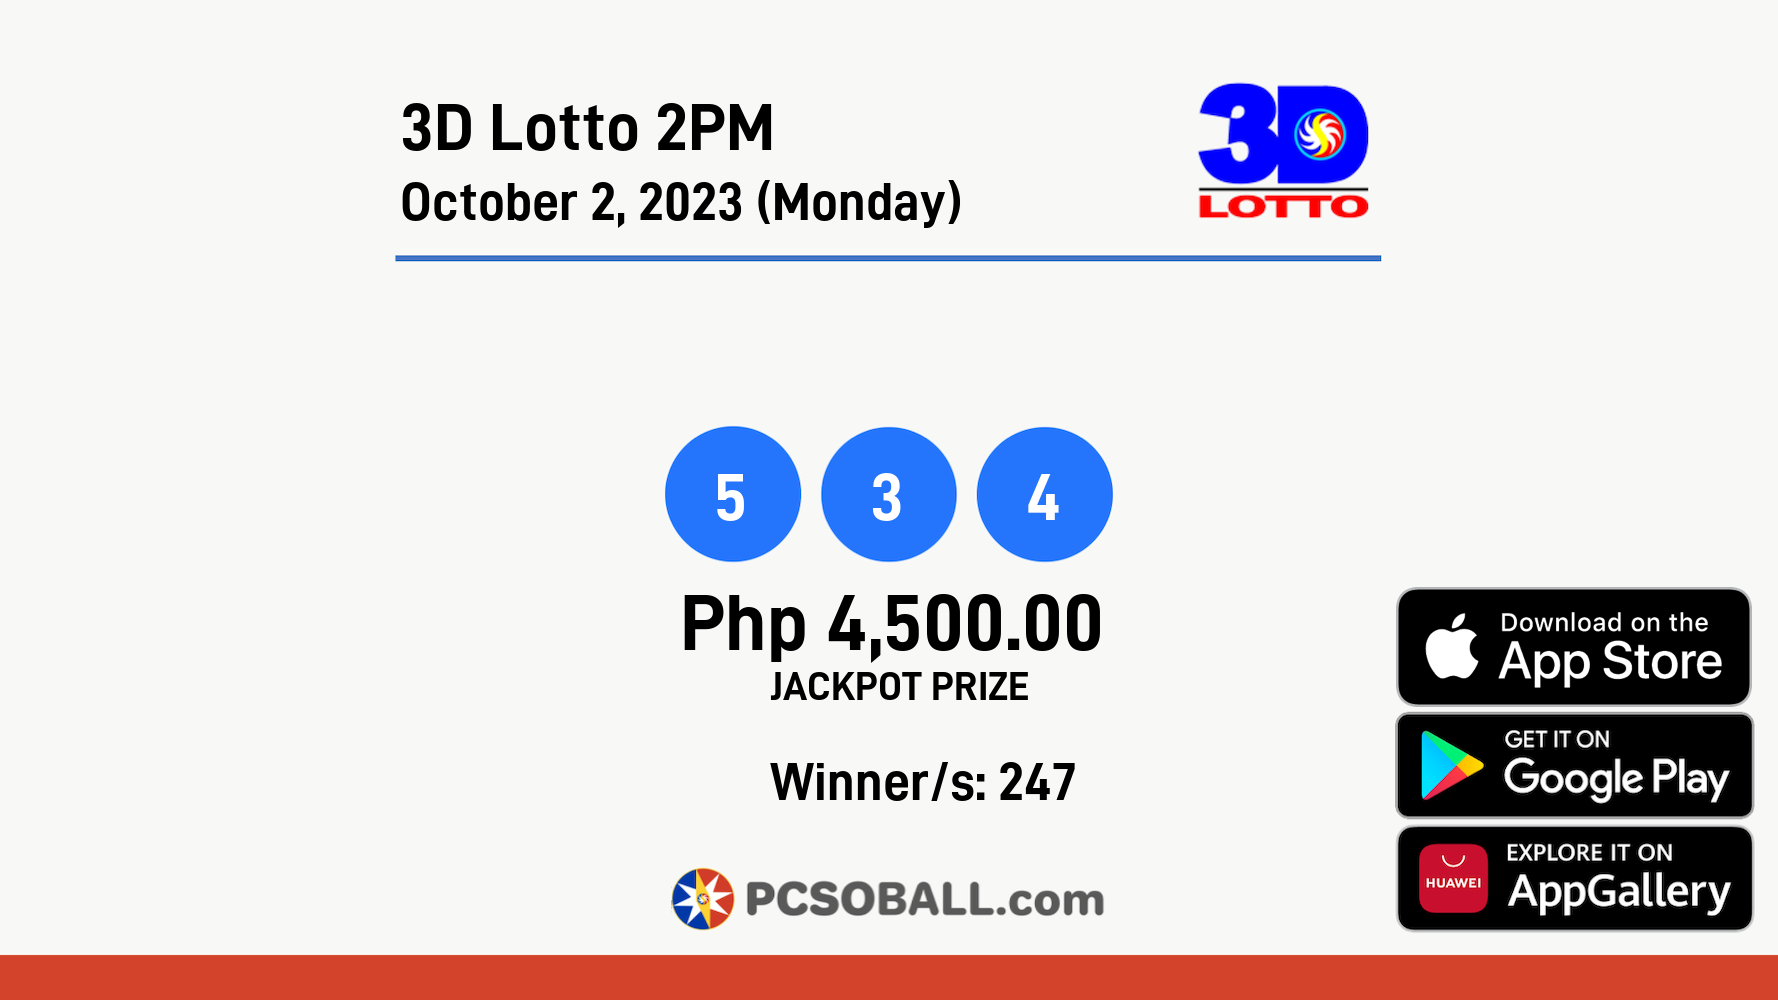 3D Lotto 2PM October 2, 2023 (Monday) Result